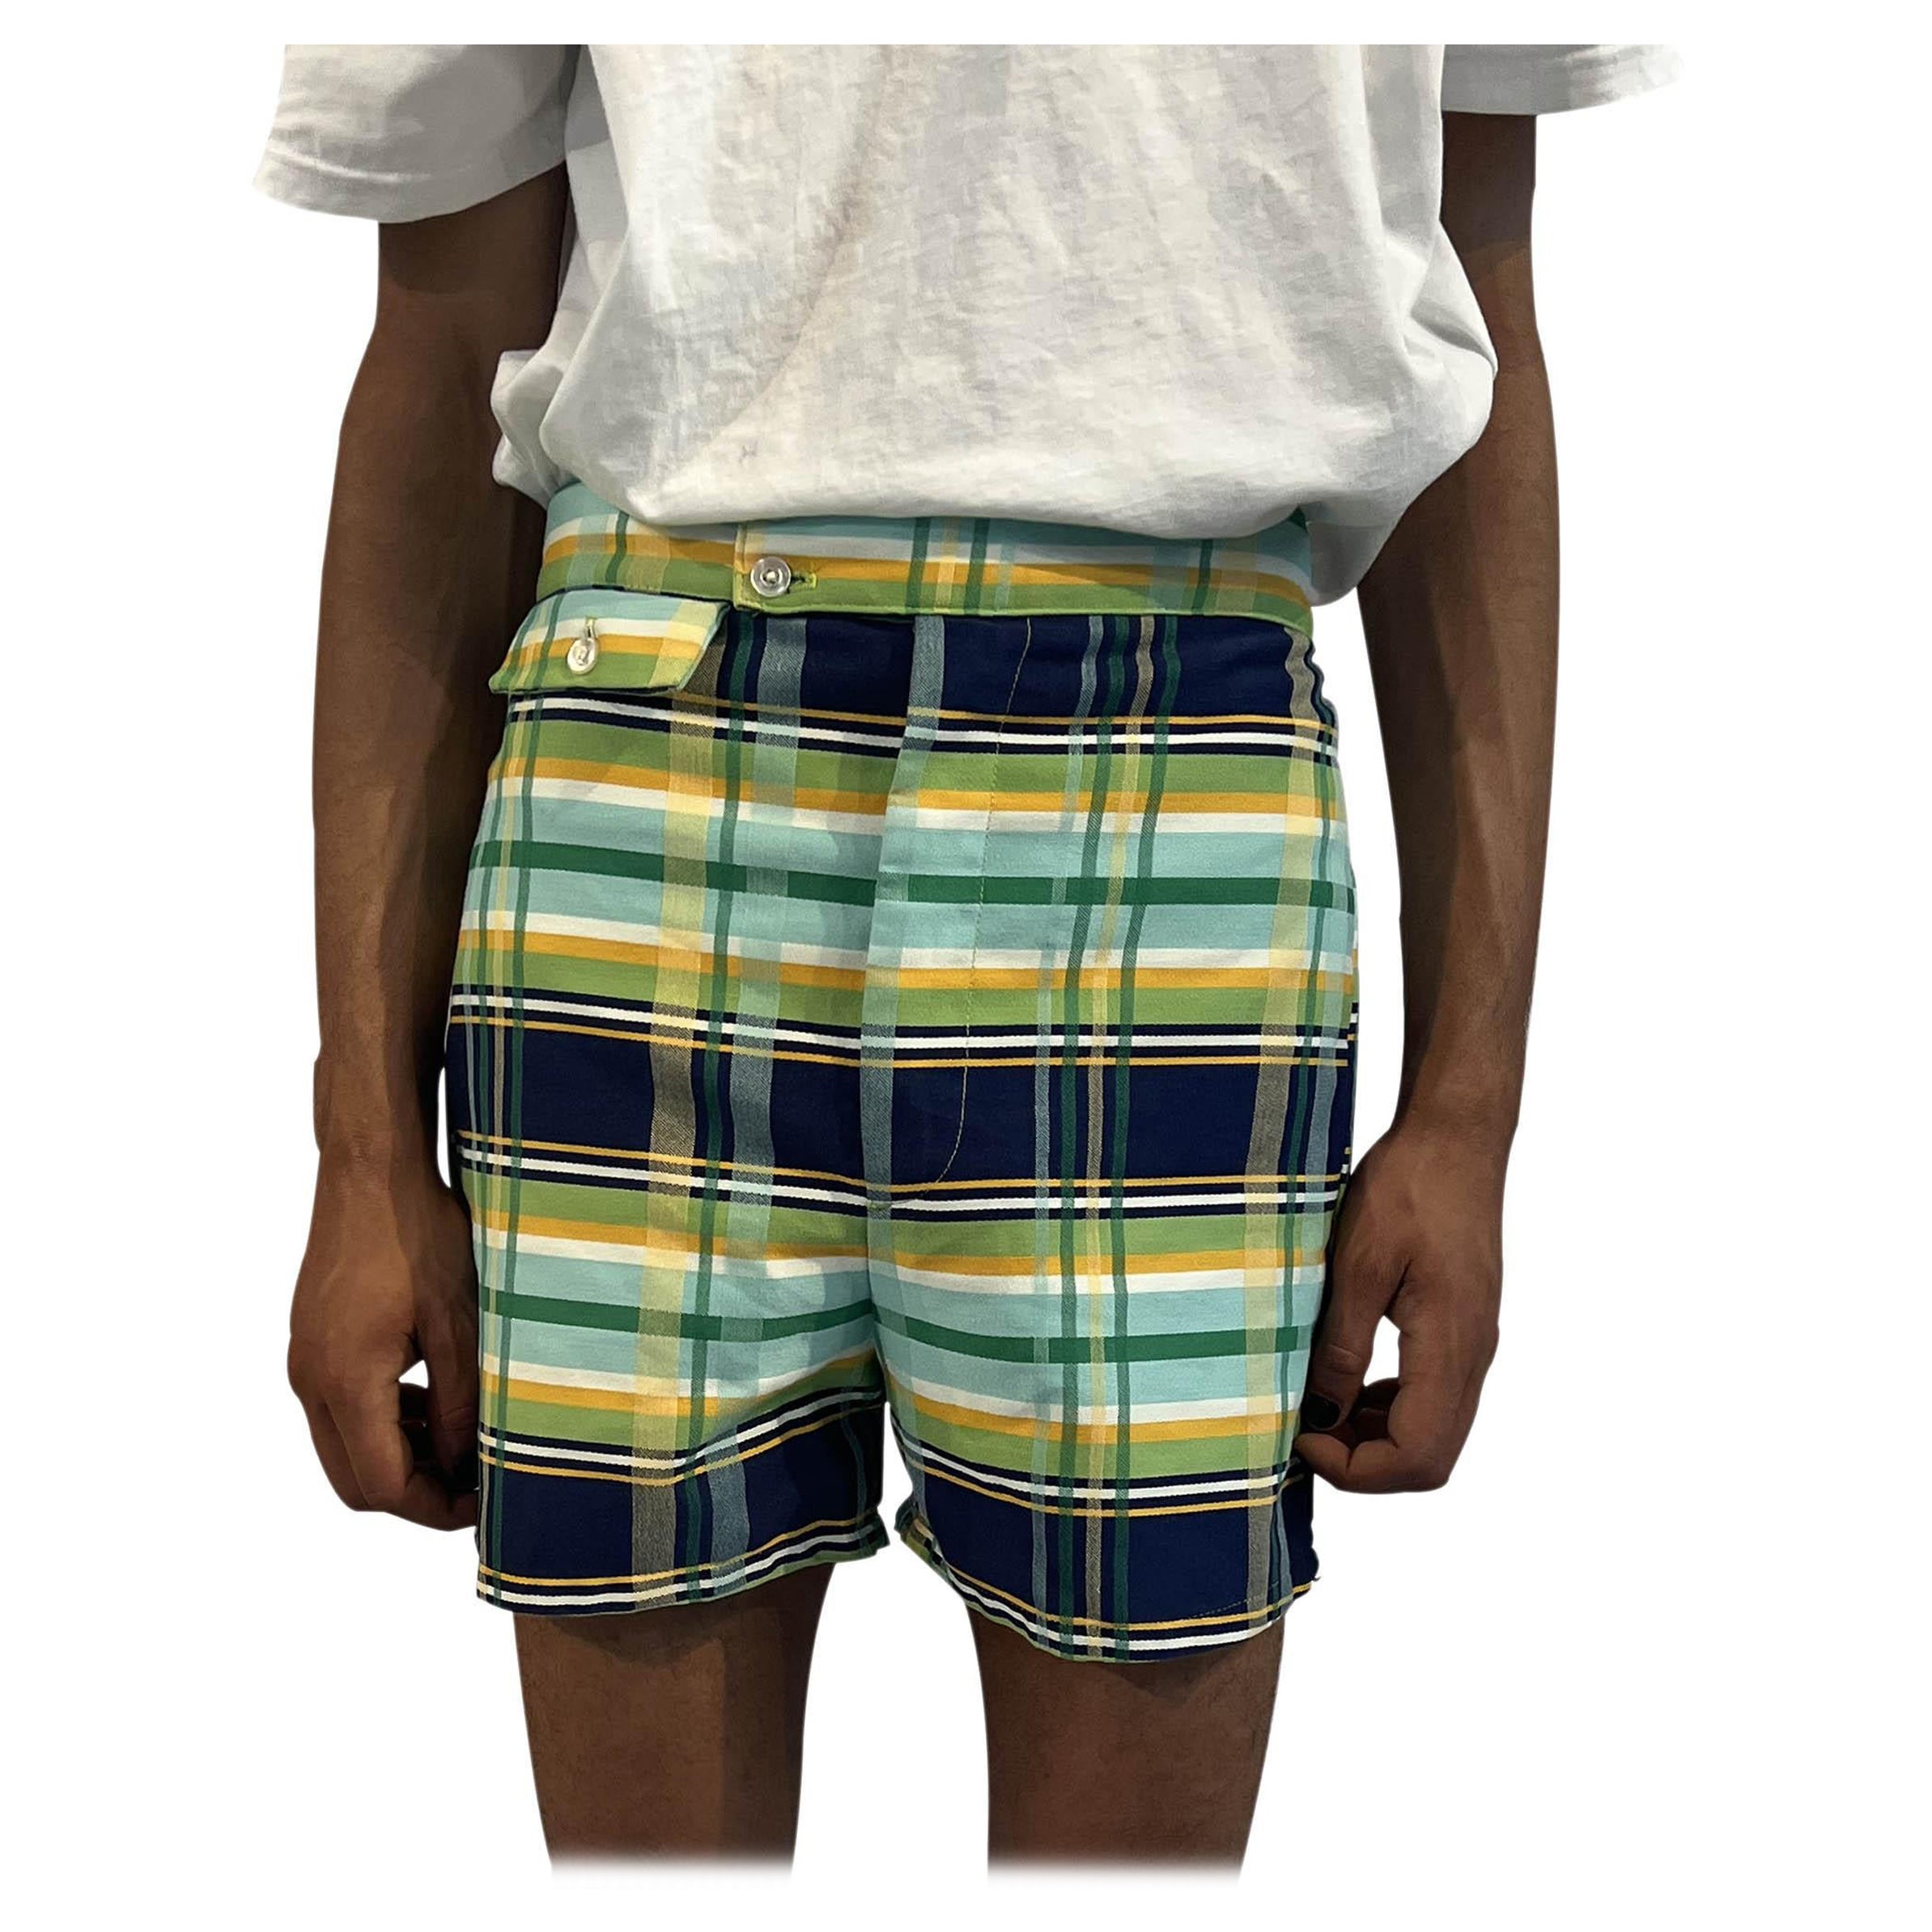 1970S Lime Green & Navy Cotton Blend Plaid Short Shorts Built In Underwear For Sale